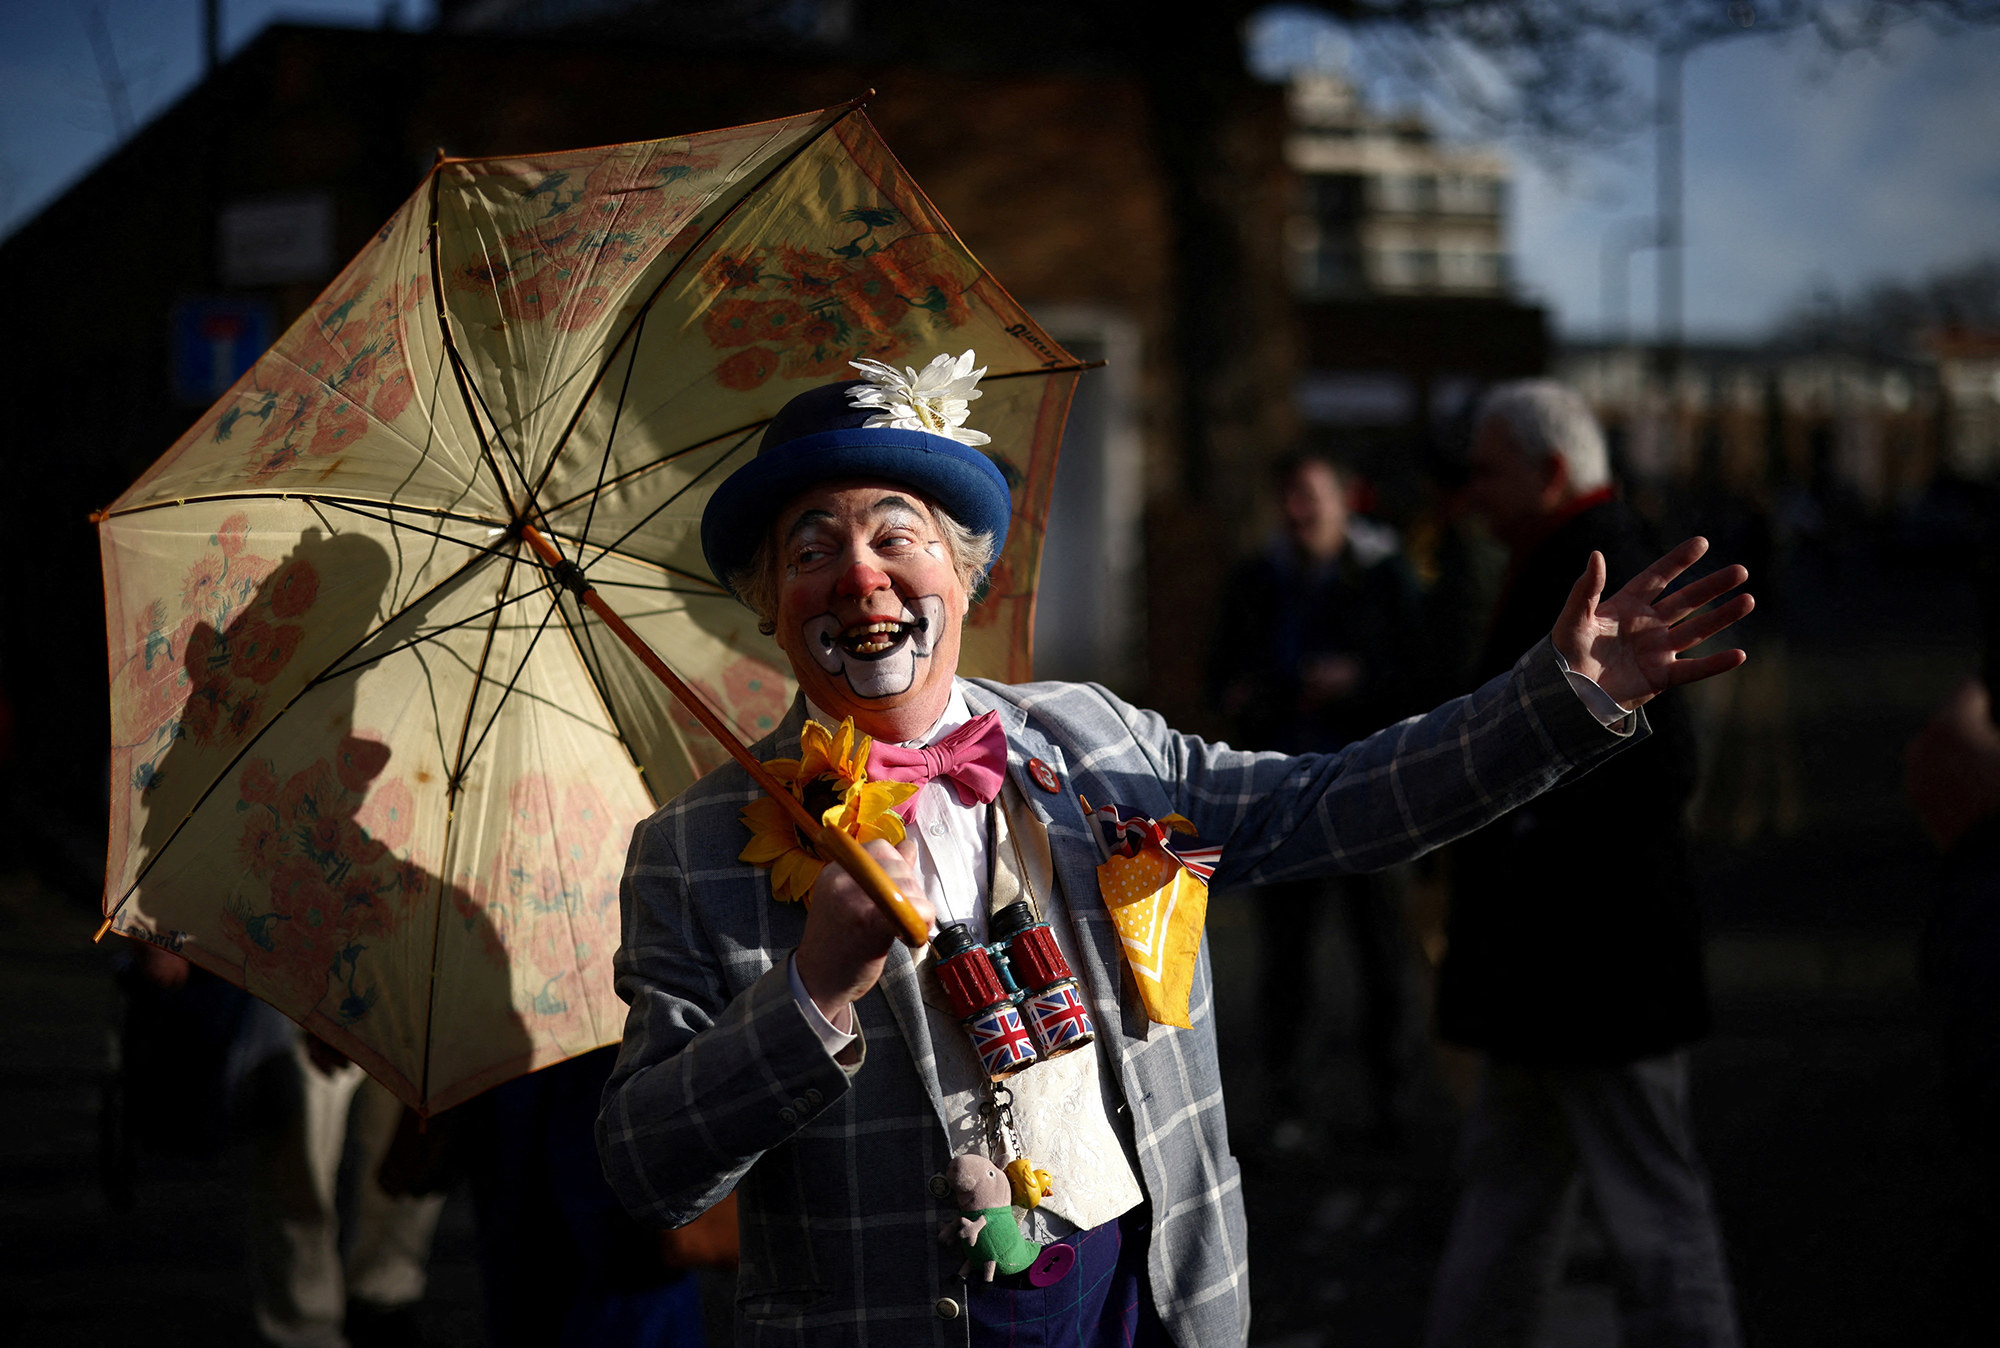 A clown holding a parasol grins and gestures in the shadows